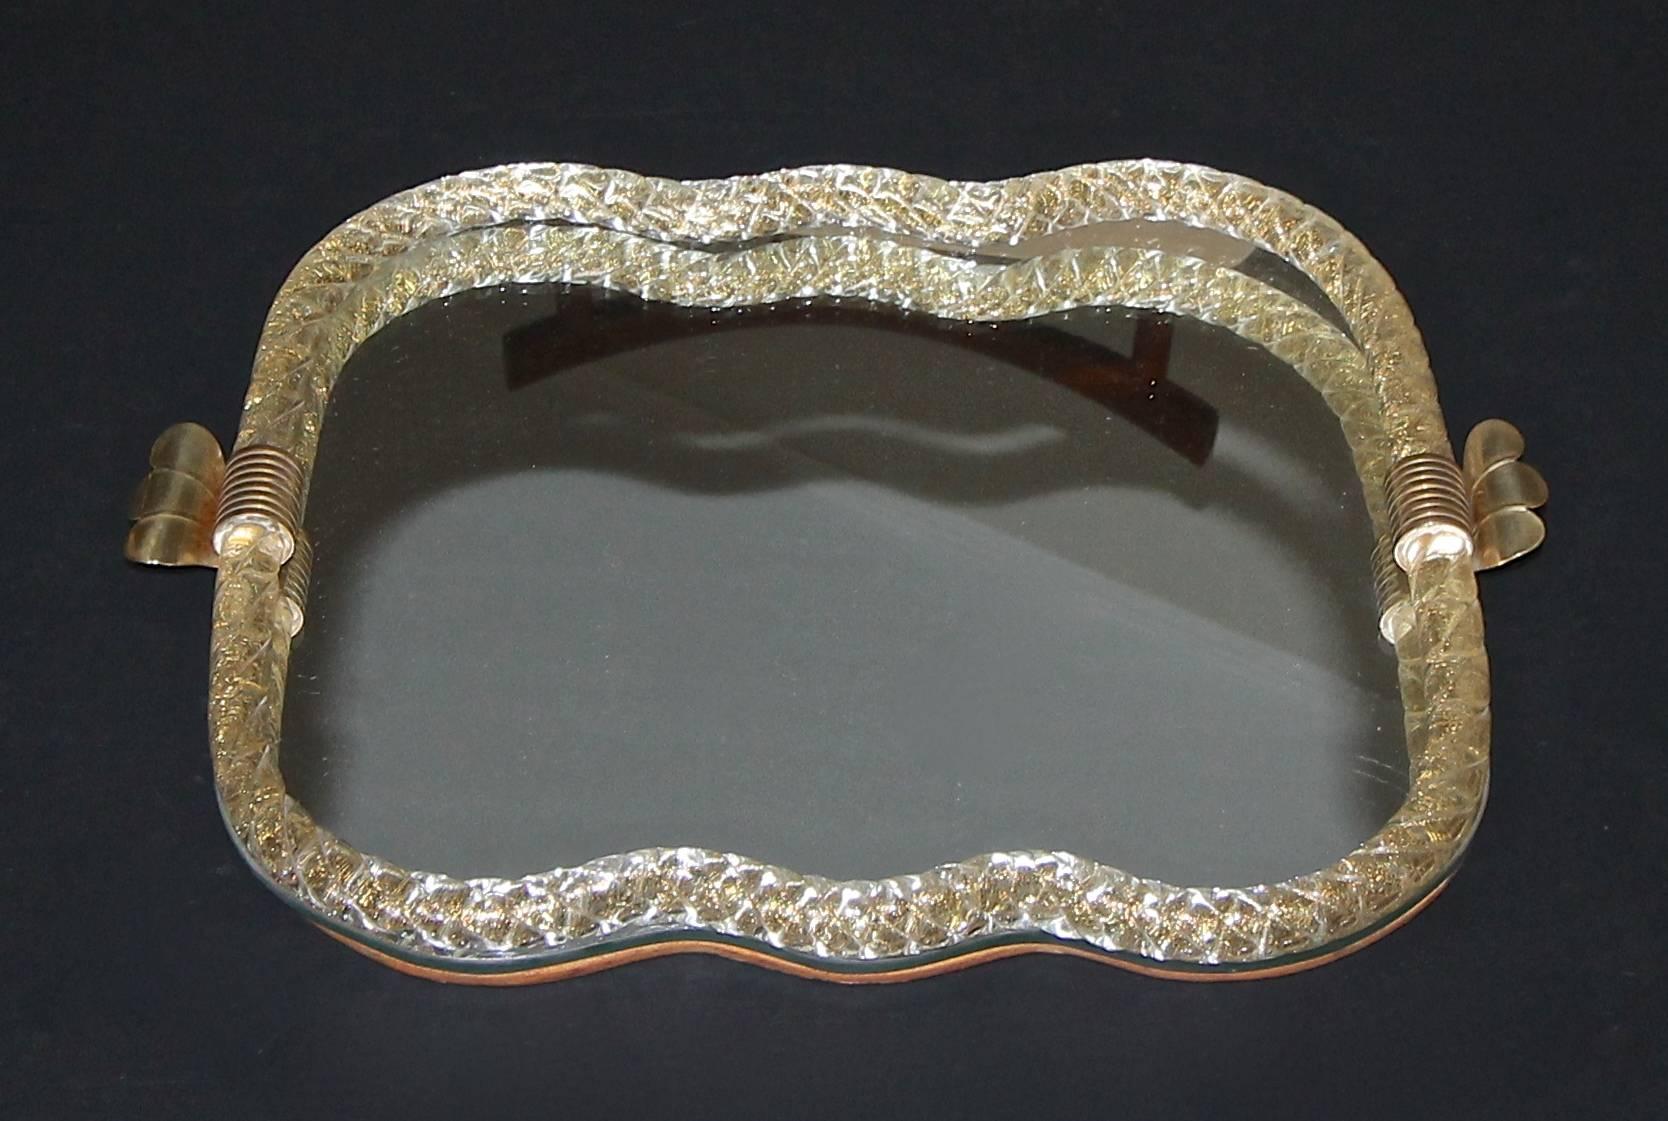 Murano glass tray with finely twisted glass rope border with gold inclusions and brass fittings. 

Tray size 15.25